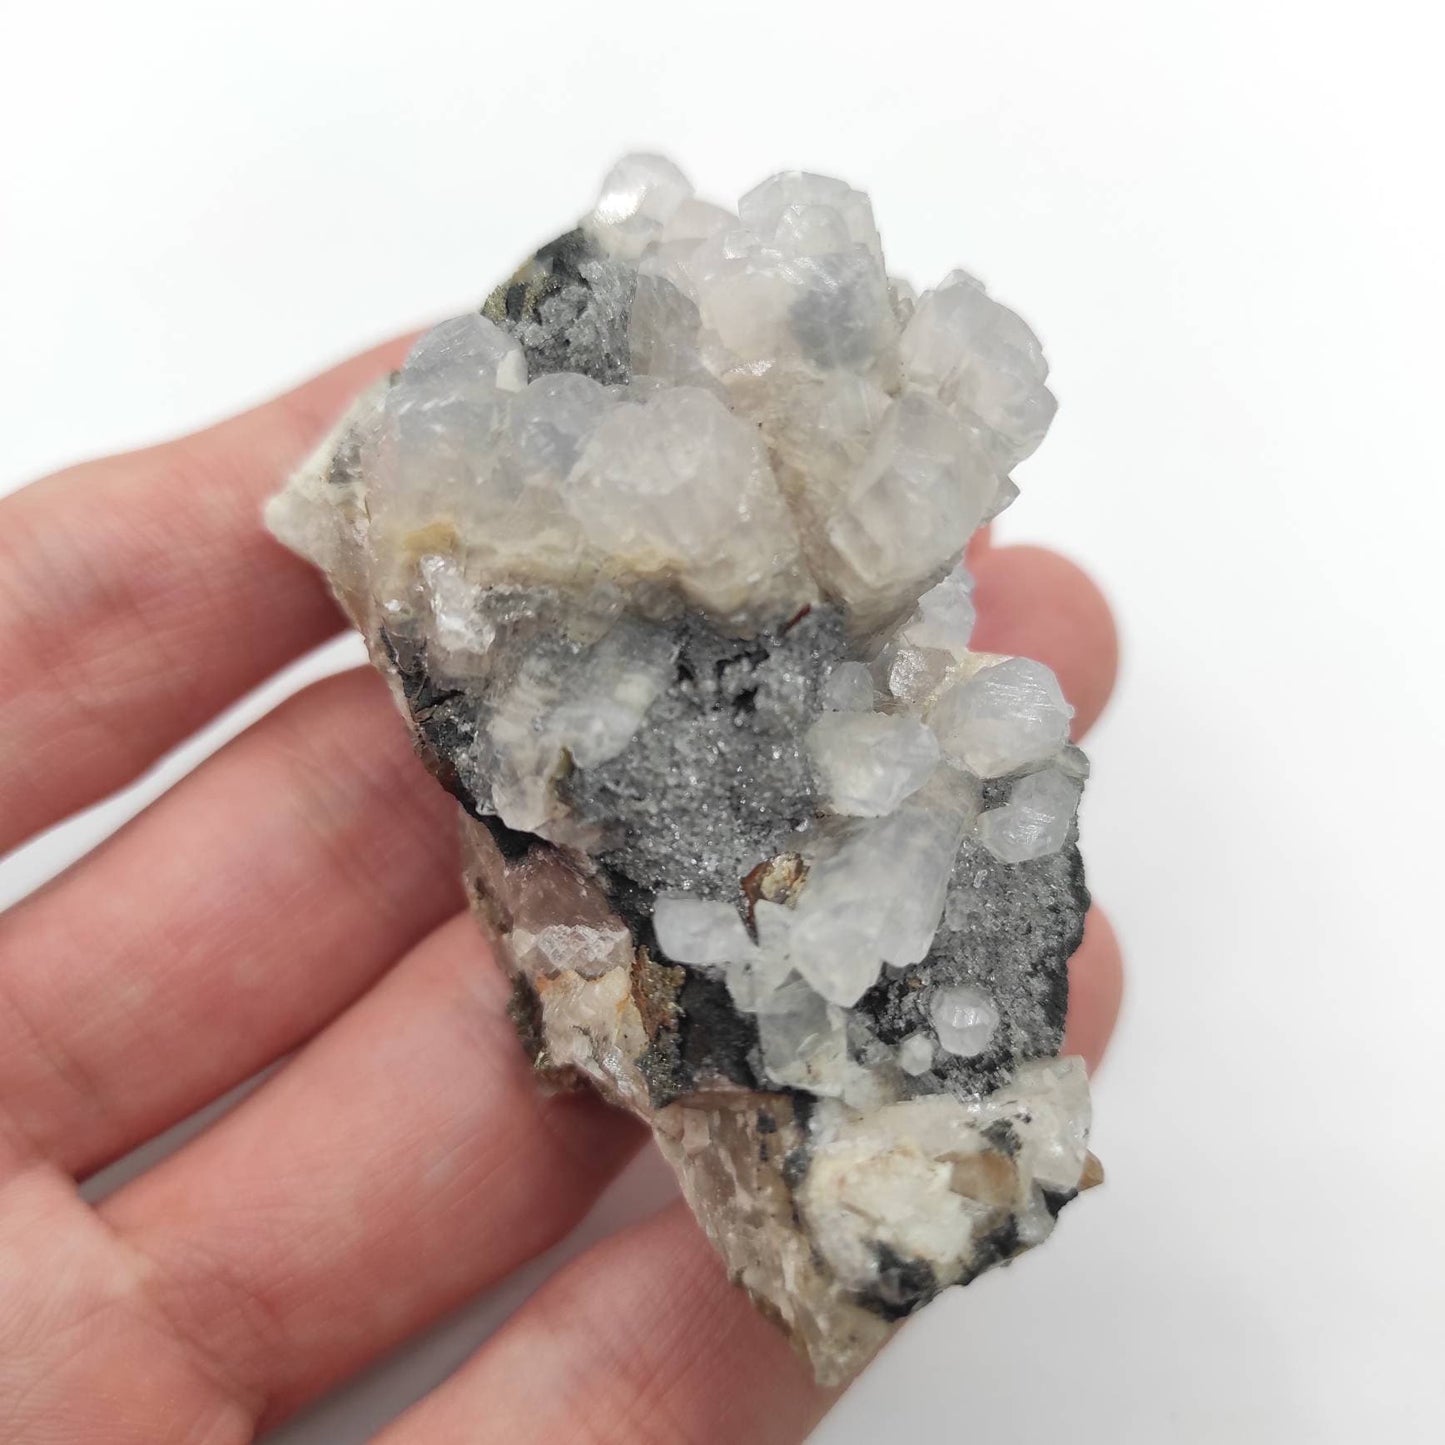 78g Calcite Crystal Specimens - Clear Calcite Mineral - Druzy Calcite Crystal on Matrix - Unique Calcite Cluster from Morocco